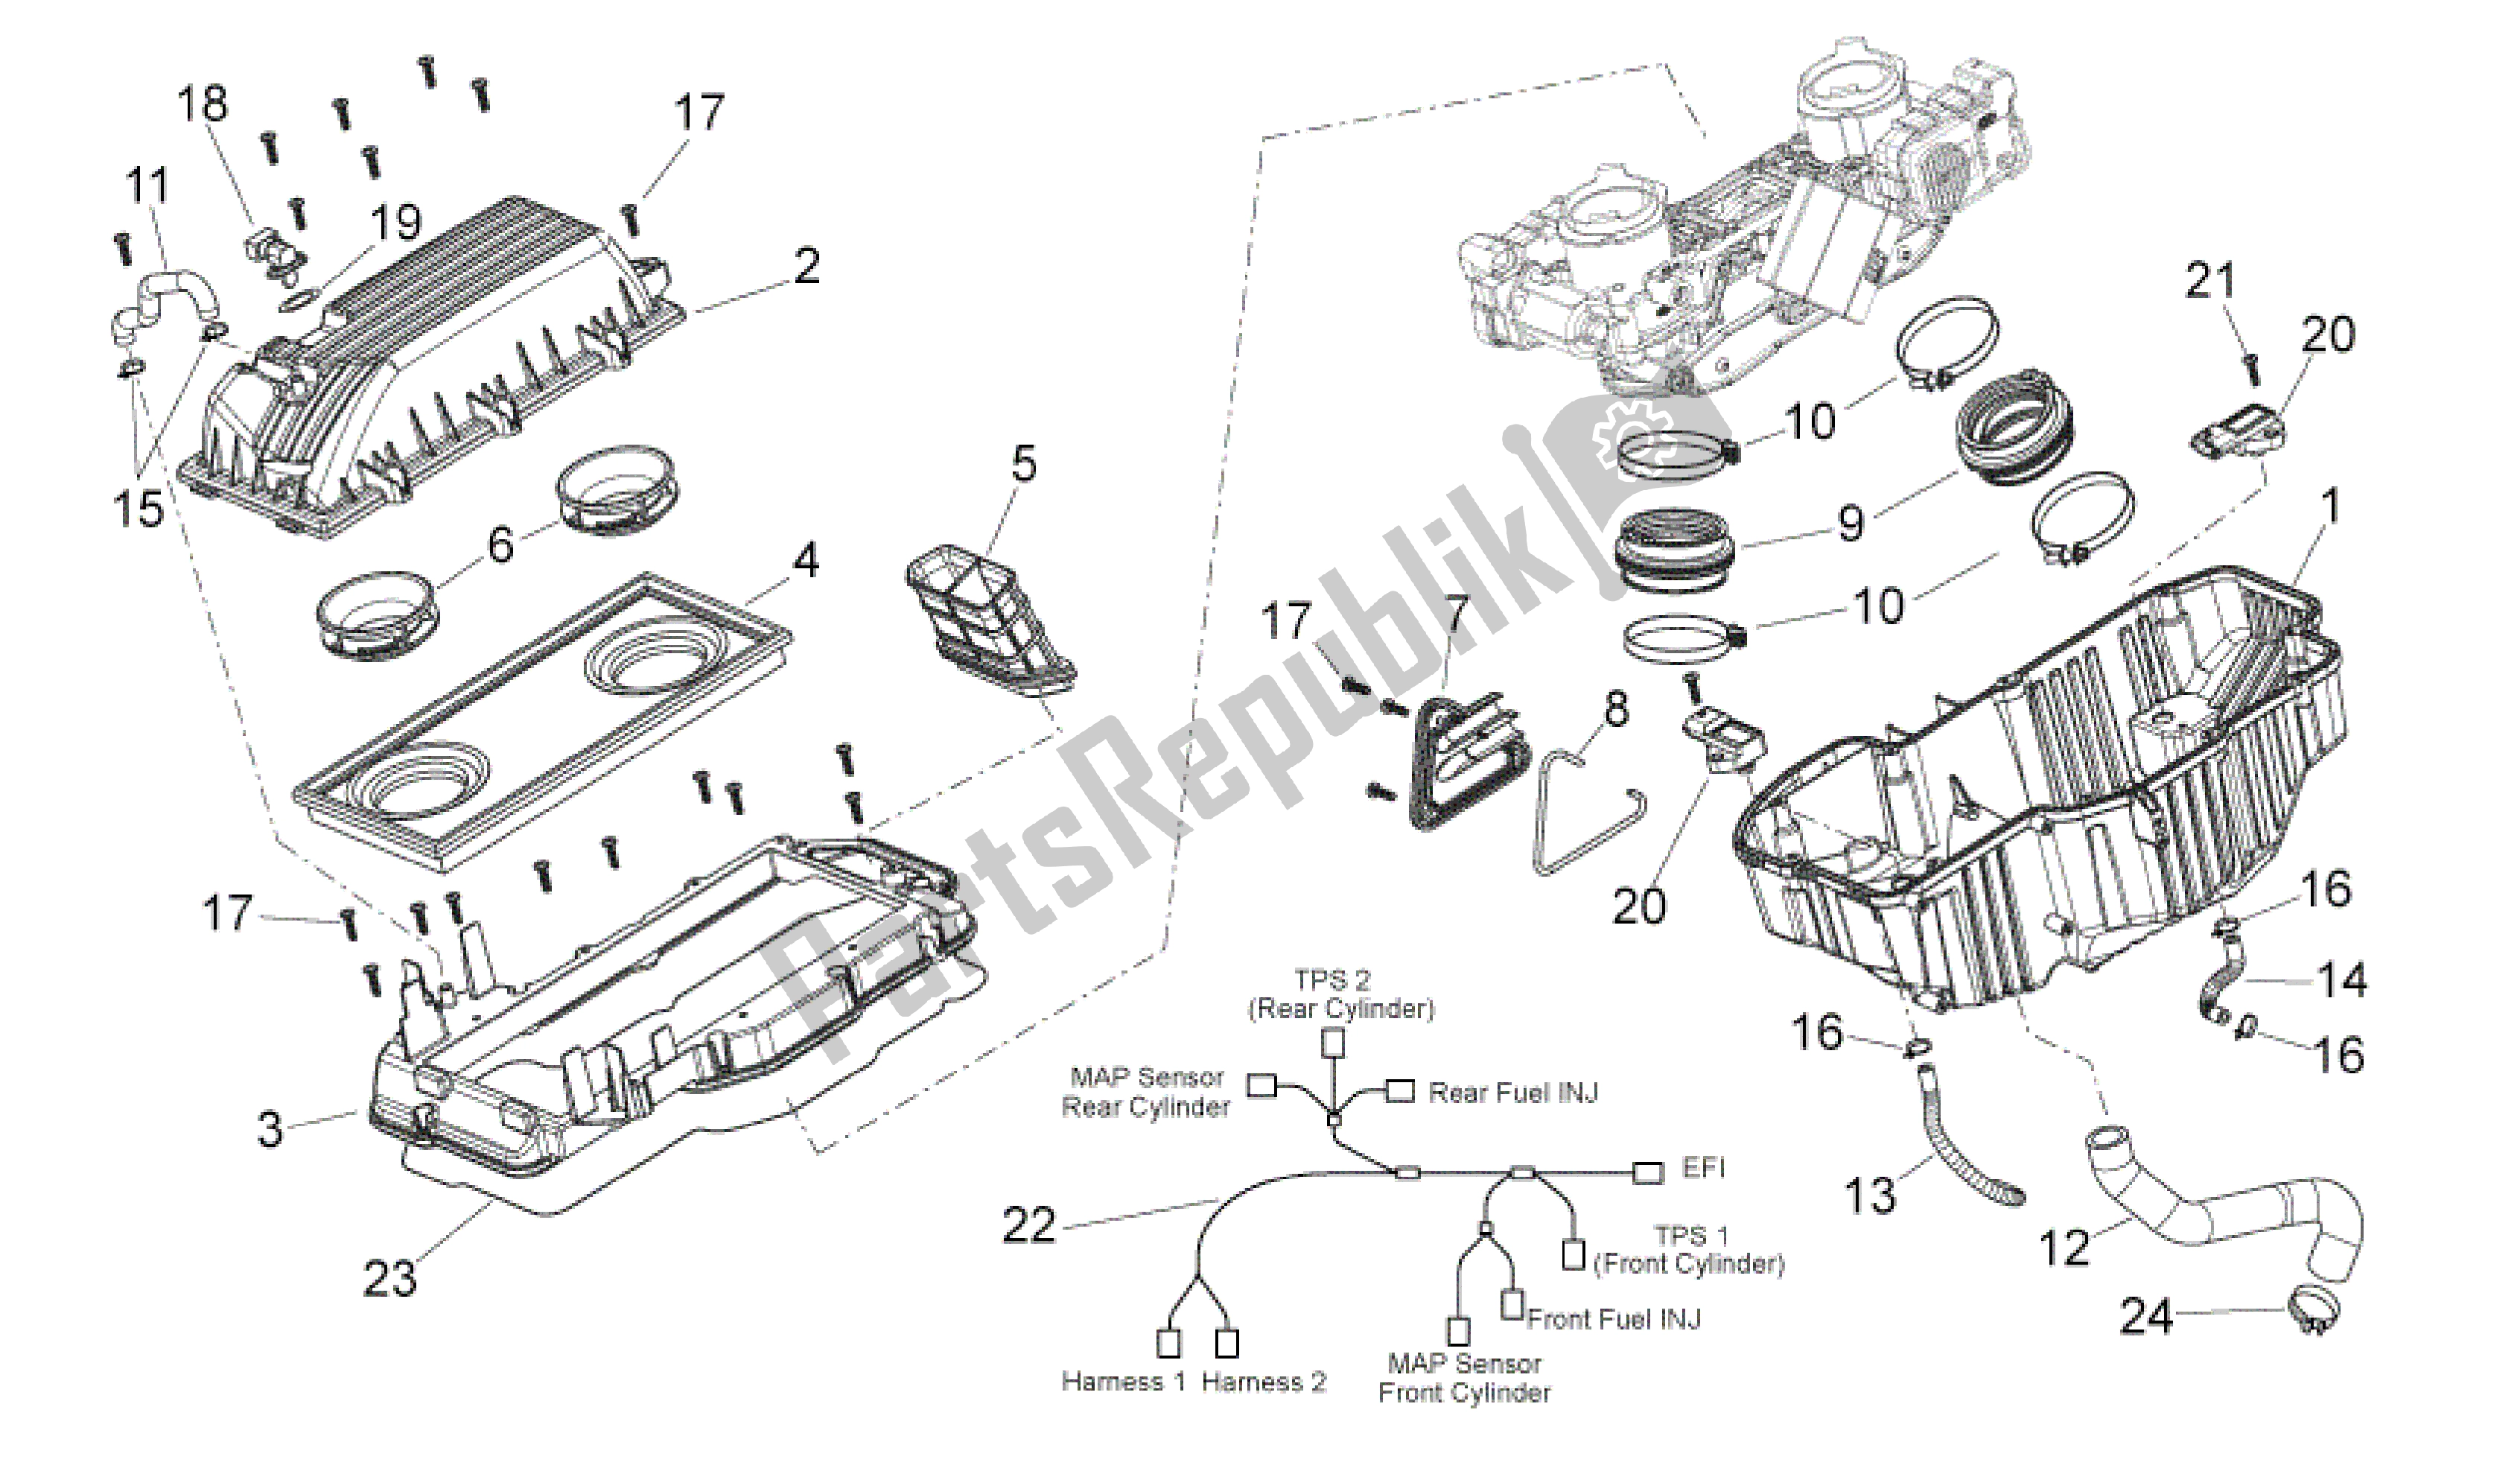 All parts for the Air Box of the Aprilia Shiver 750 2011 - 2013